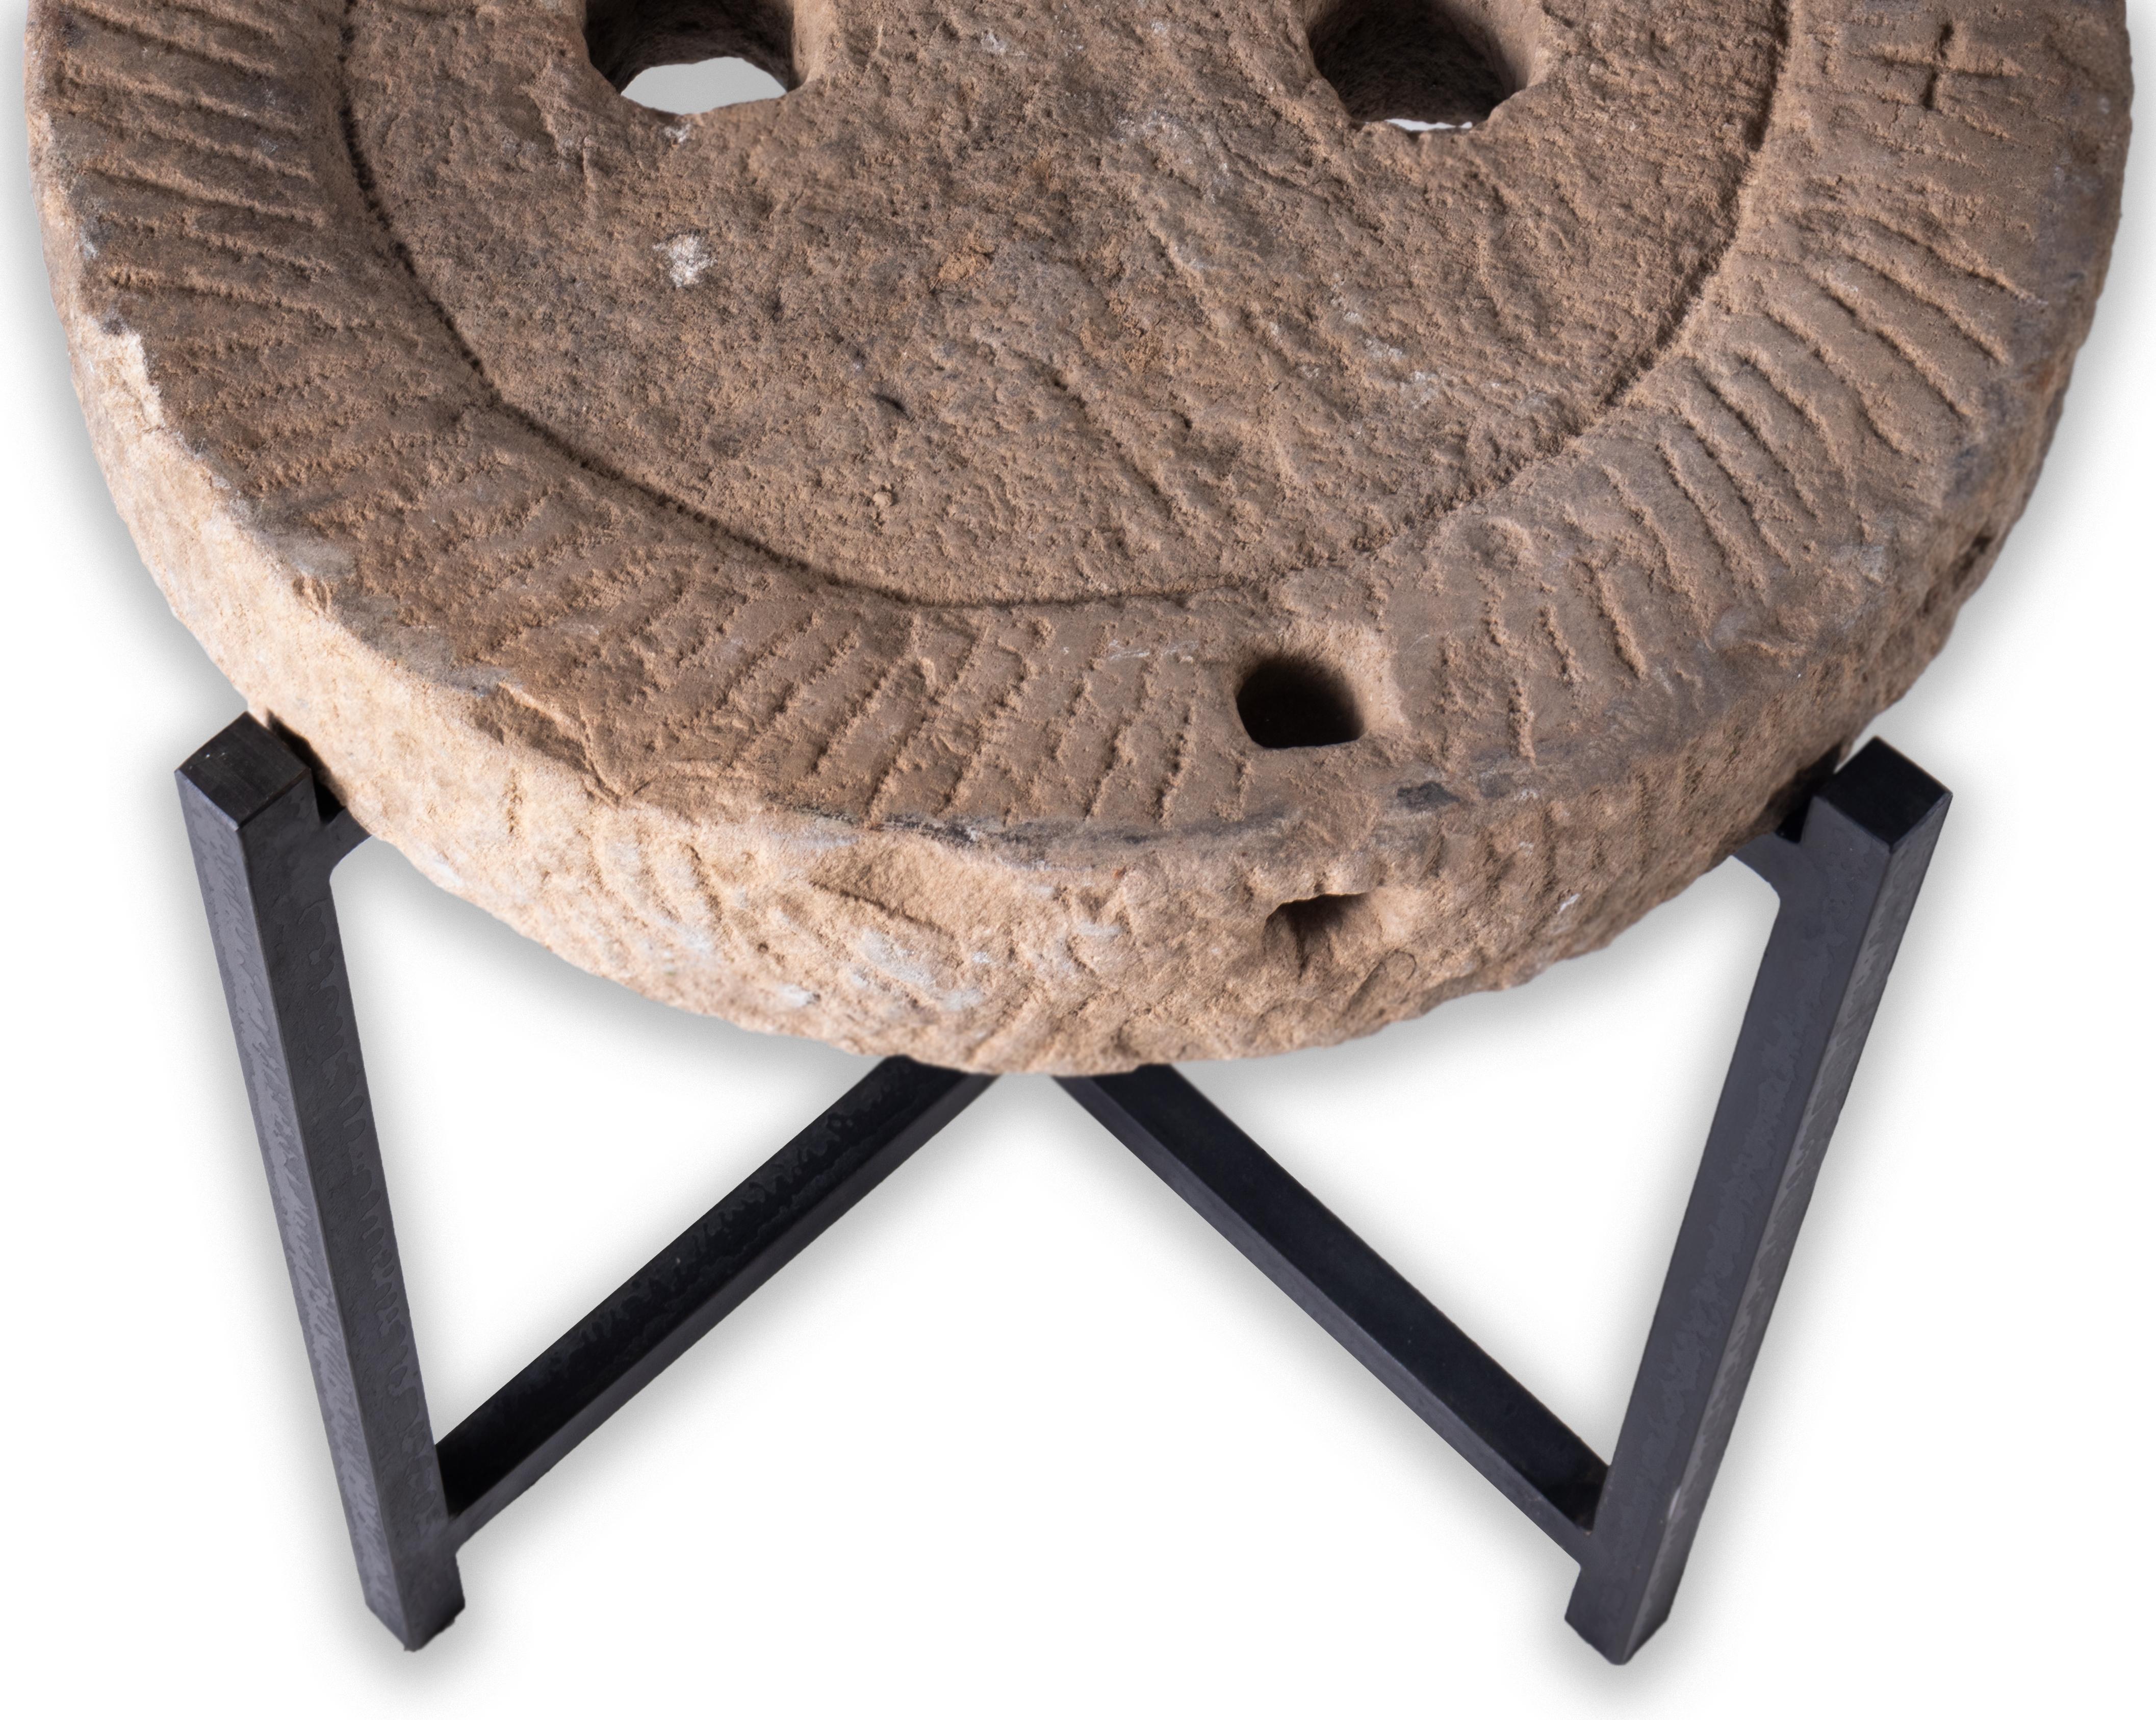 Rustic Limestone Mill Wheel on Stand For Sale